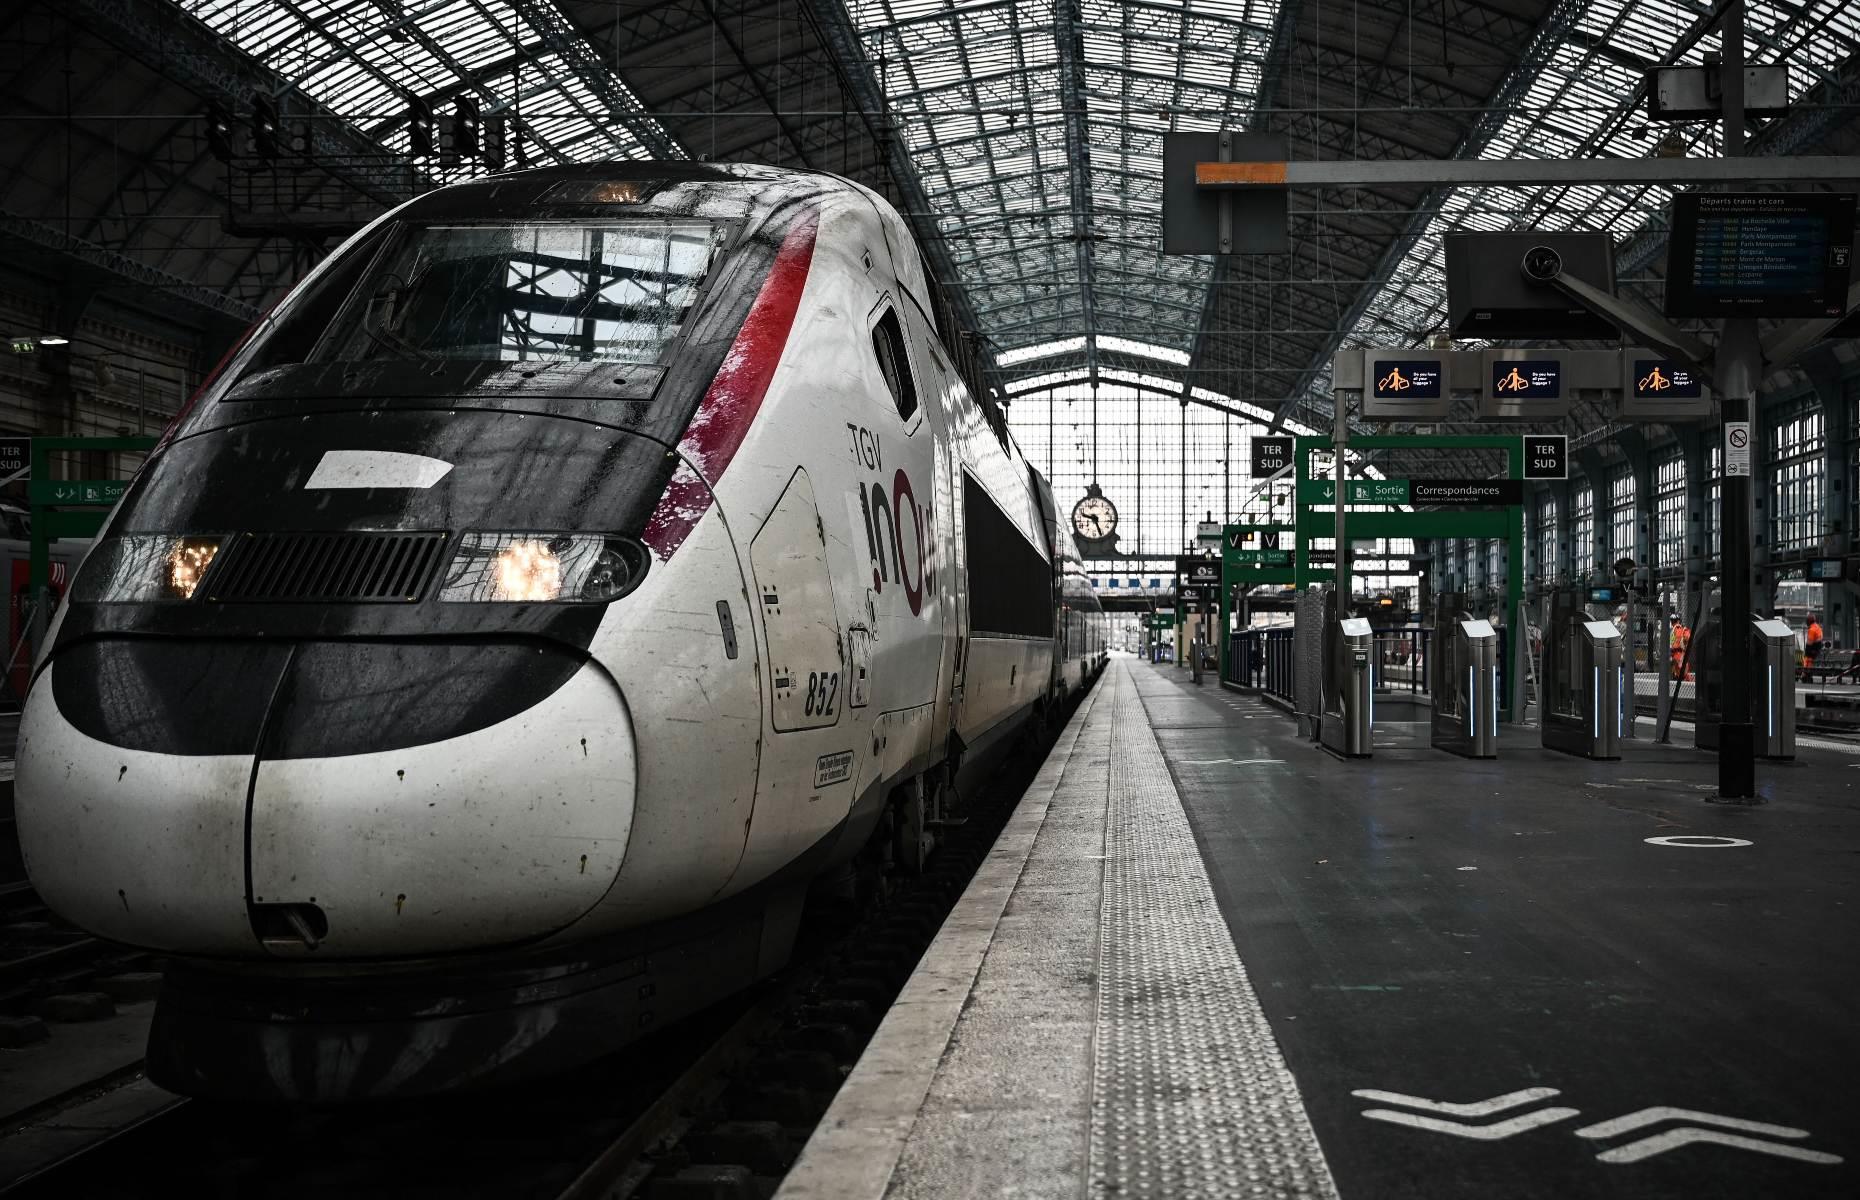 <p>High-speed train travel is already hugely popular in cities like London, Brussels and Paris so the demand for a larger network is rapidly growing too. The current plan is to double high-speed train use by 2030 and triple current levels by 2050. According to French rail operator SNCF, a direct line from Berlin to Paris could start running as early as 2023.</p>